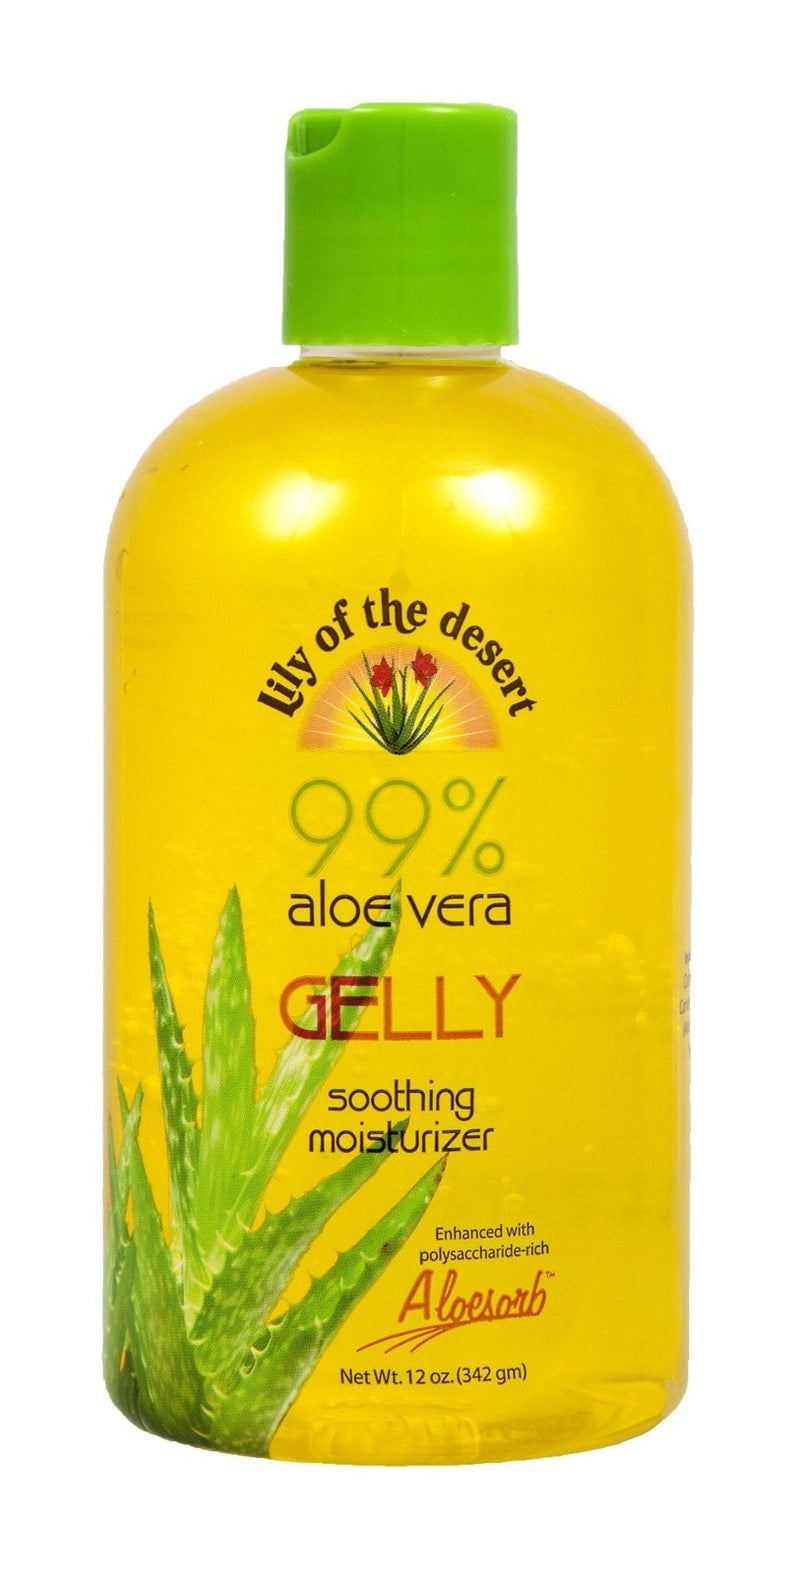 Lily of the Desert 99% Aloe Vera Gelly Soothing Moisturizer Image 2